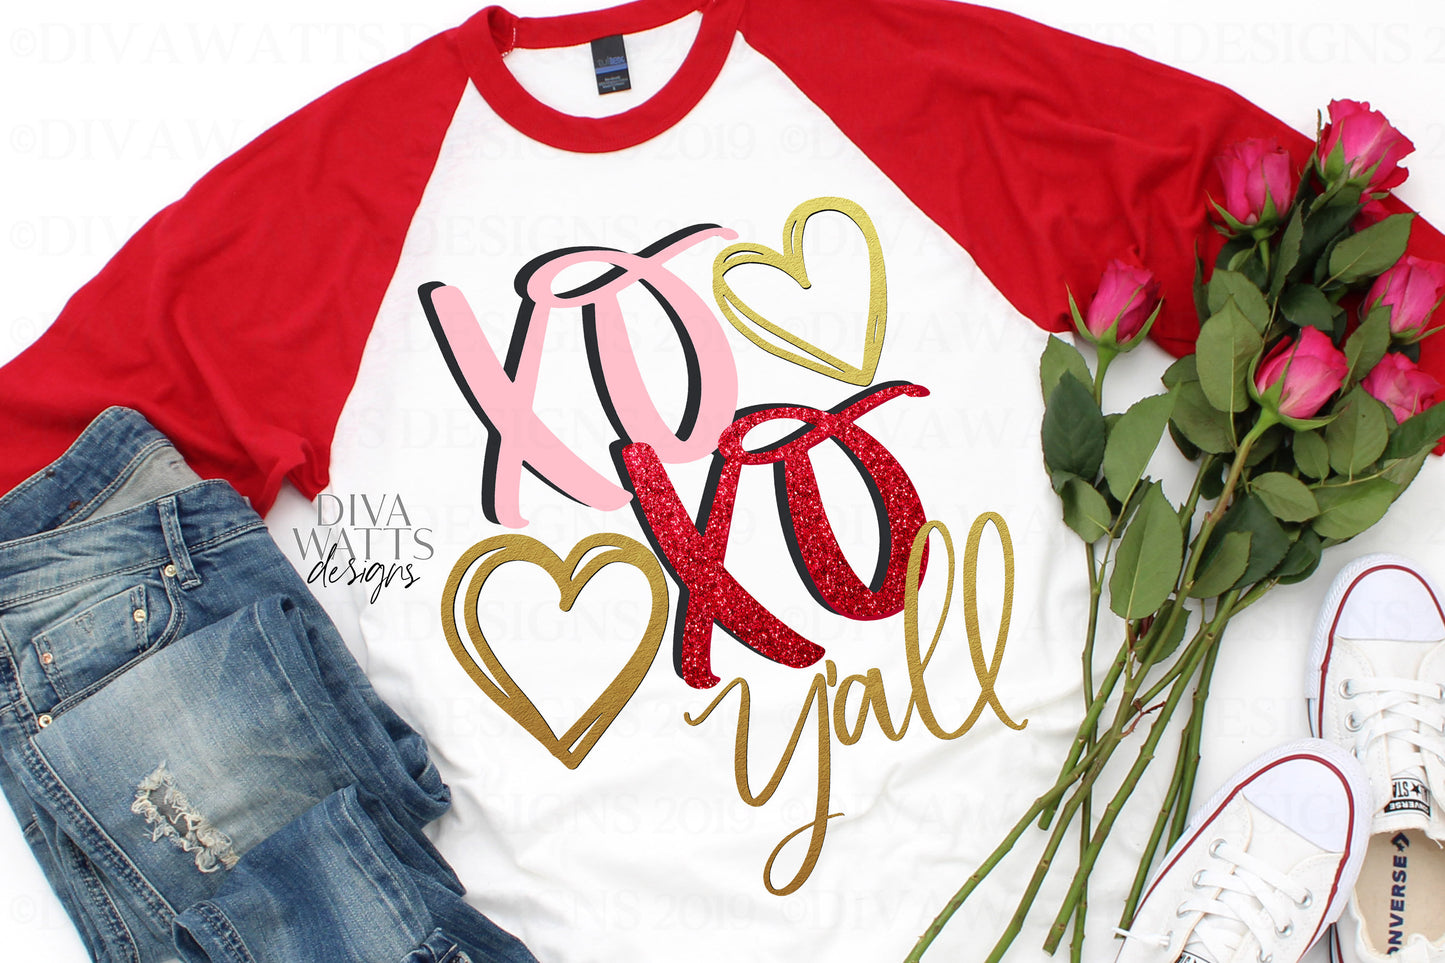 SVG | XOXO Y'all | Cutting File | Doodle Hearts | Valentine's Day | Valentine Love | Sign Shirt Card | Vinyl Stencil HTV | png | Clipart